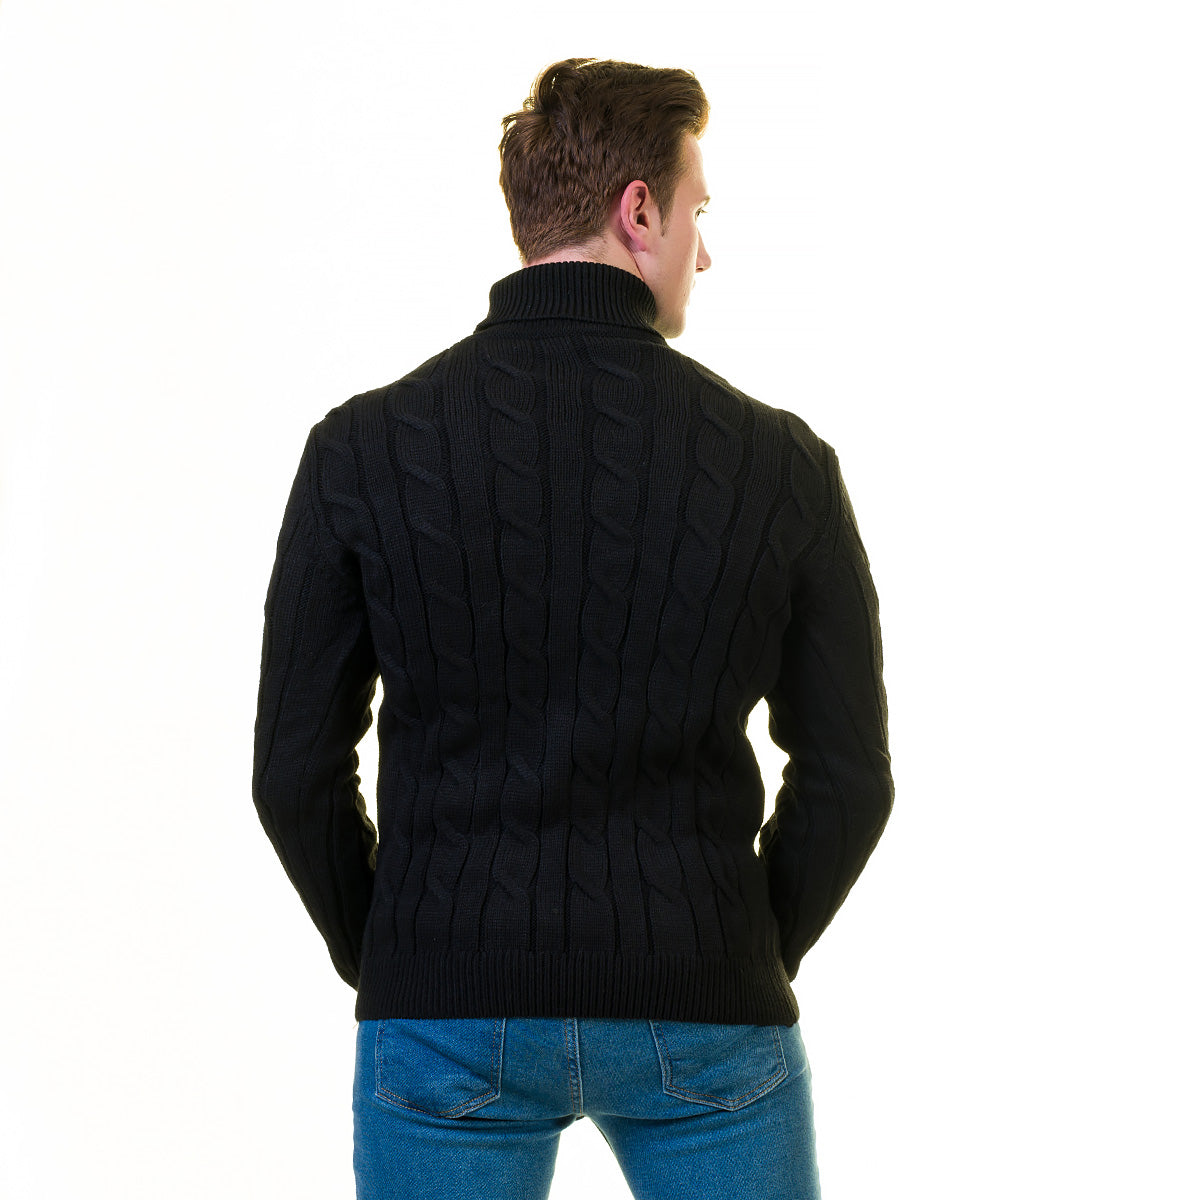 Black European Wool Luxury Zippered With Sweater Jacket Warm Winter Tailor Fit